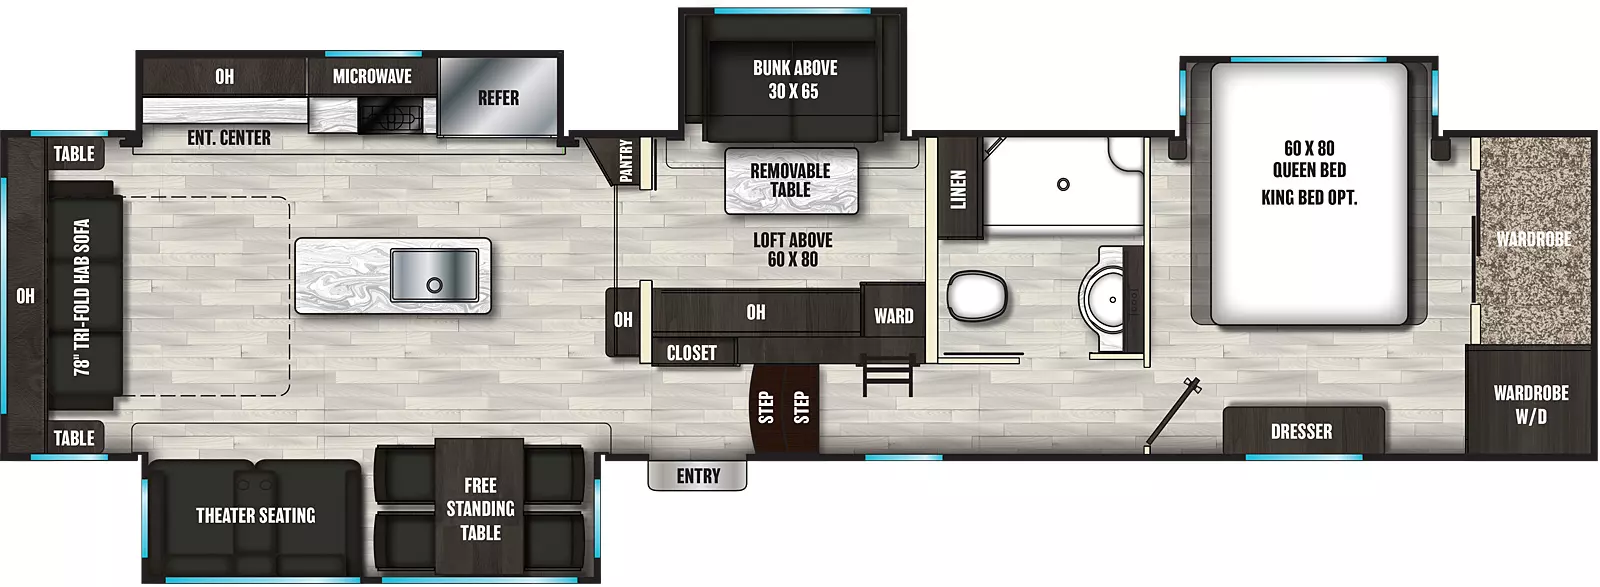 The 398MBL has four slideouts and one entry. Interior layout front to back: front bedroom with off-door side queen bed slideout, front wardrobe with washer and dryer, and door side dresser; off-door side full bathroom with linen closet; ladder to loft above mid room; two steps down to entry and closet; off-door side room overhead cabinet and wardrobe along inner wall opposite the off-door side slideout with bunk above and removeable table; door side slide out containing free standing table and theater seating; kitchen island with sink; off-door side pantry and slide out with refrigerator, microwave, overhead cabinets, and entertainment center; rear tri-fold sofa with overhead cabinet and tables on each side.